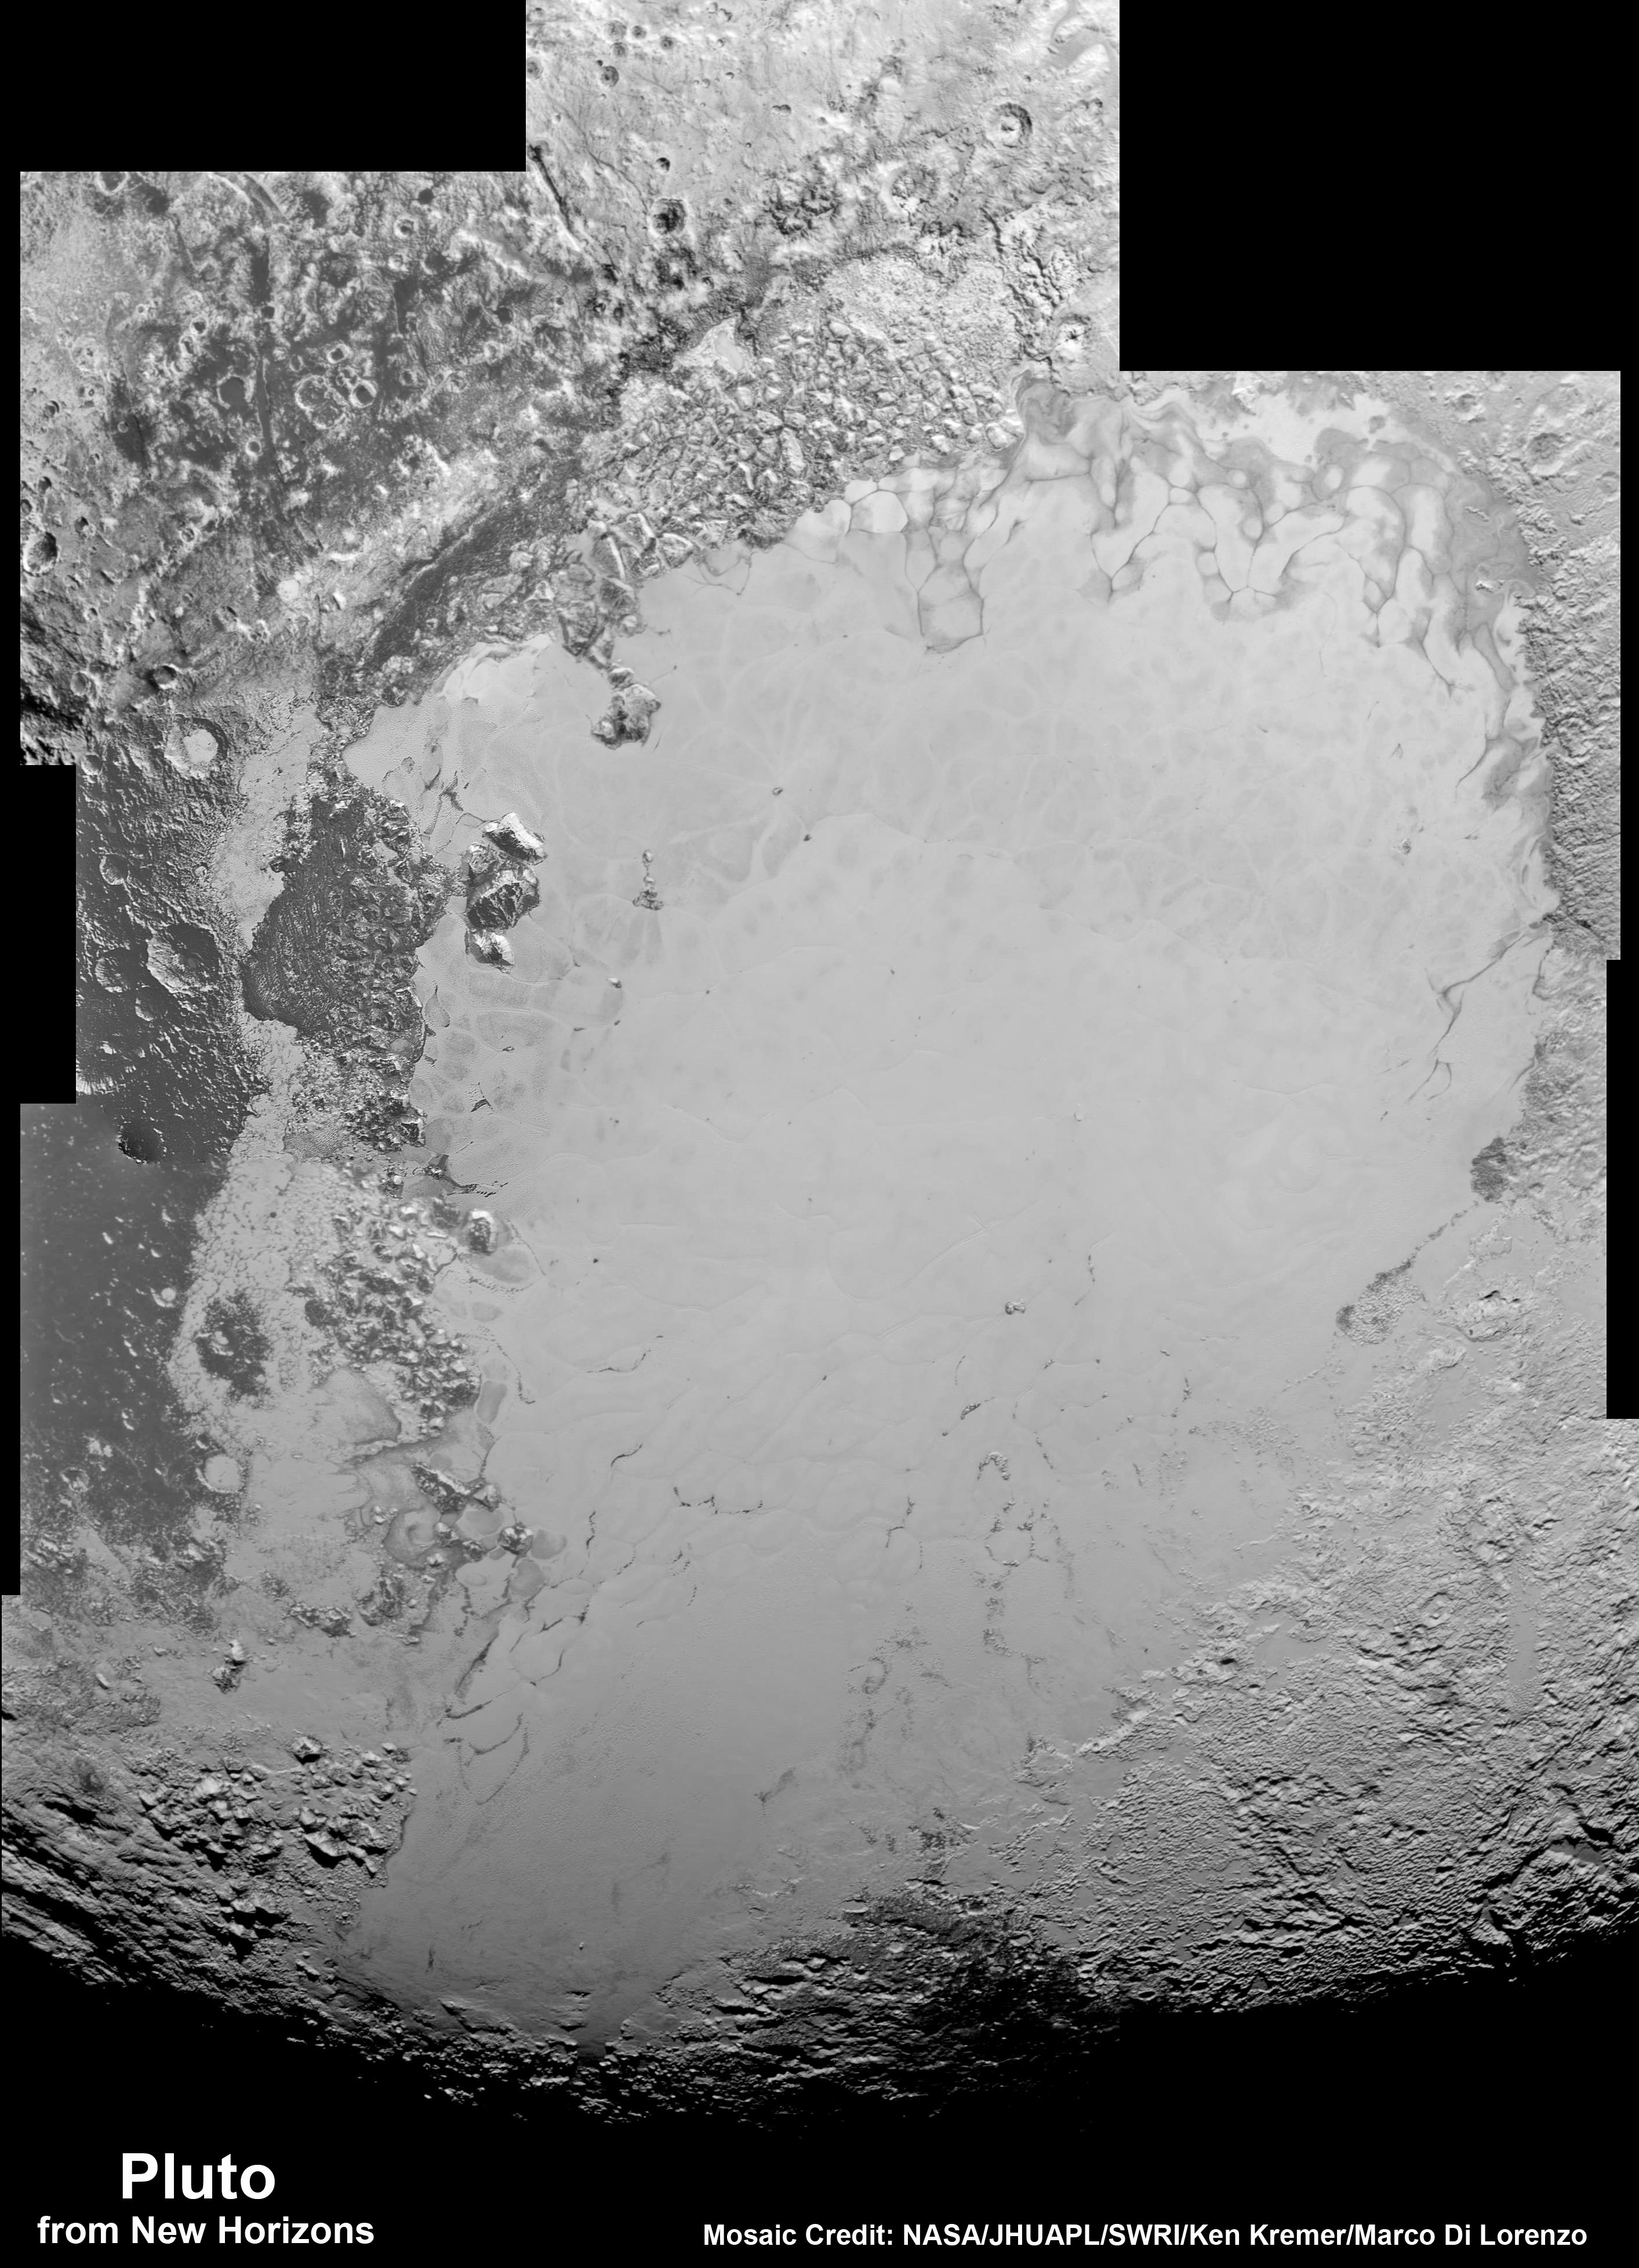 Highest resolution mosaic of ‘Tombaugh Regio’ shows the heart-shaped region on Pluto including ice flows and plains of ‘Sputnik Planum’ (center) and icy mountain ranges of ‘Hillary Montes’ and ‘Norgay Montes.’  This new mosaic combines the eleven highest resolution images captured by NASA’s New Horizons LORRI imager during history making closest approach flyby on July 14, 2015.   Credit: NASA/JHUAPL/SWRI/Ken Kremer/kenkremer.com/Marco Di Lorenzo 